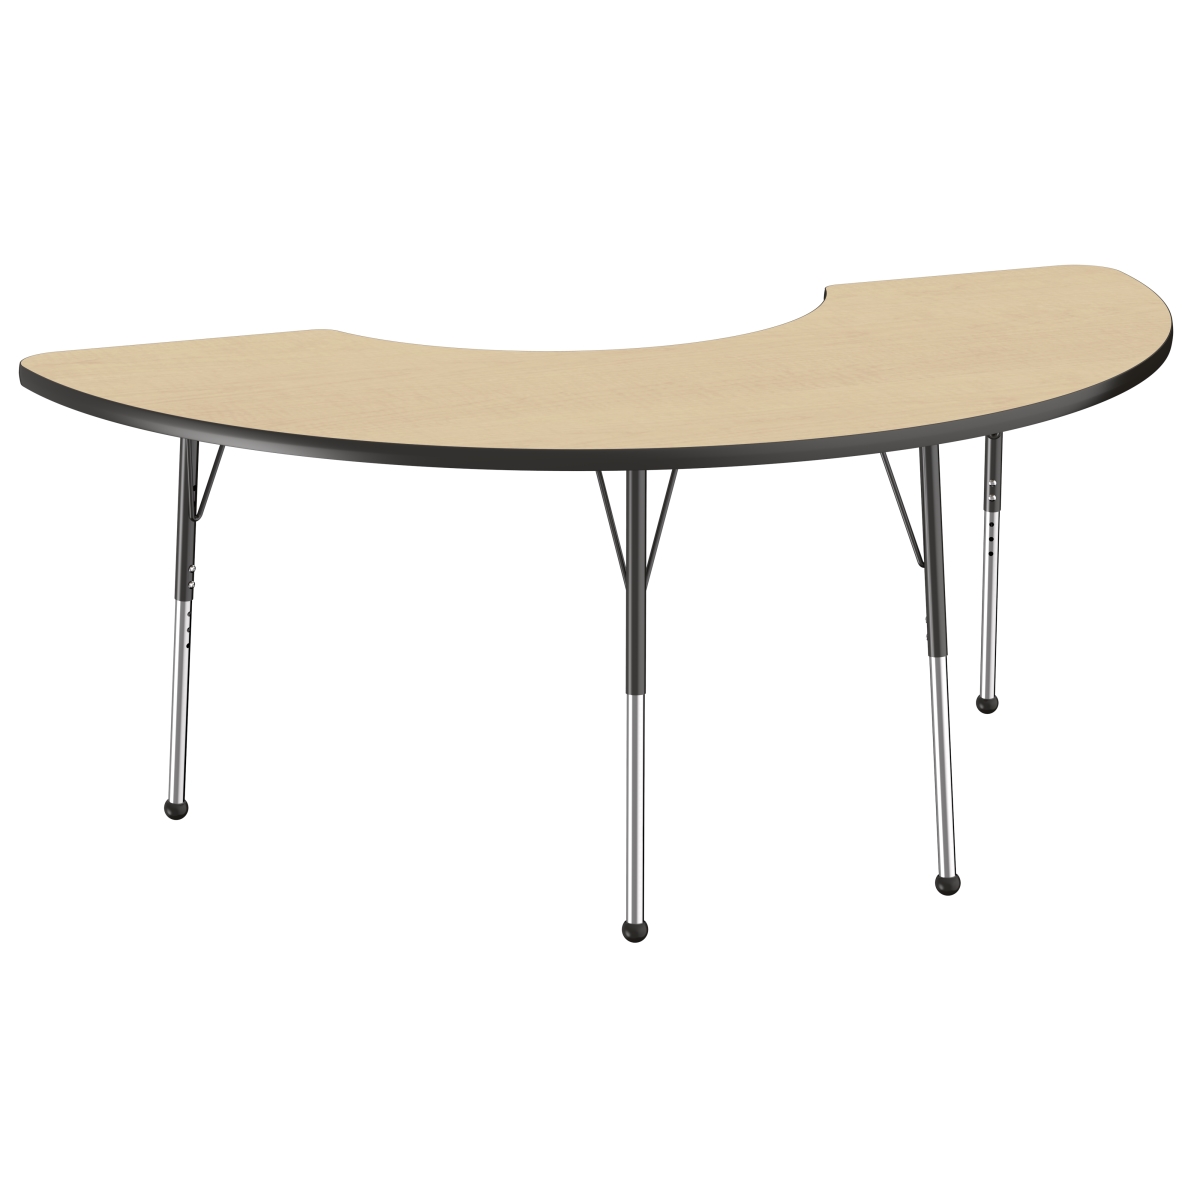 10078-mpbk 36 X 72 In. Half Moon T-mold Adjustable Activity Table With Standard Ball - Maple & Black